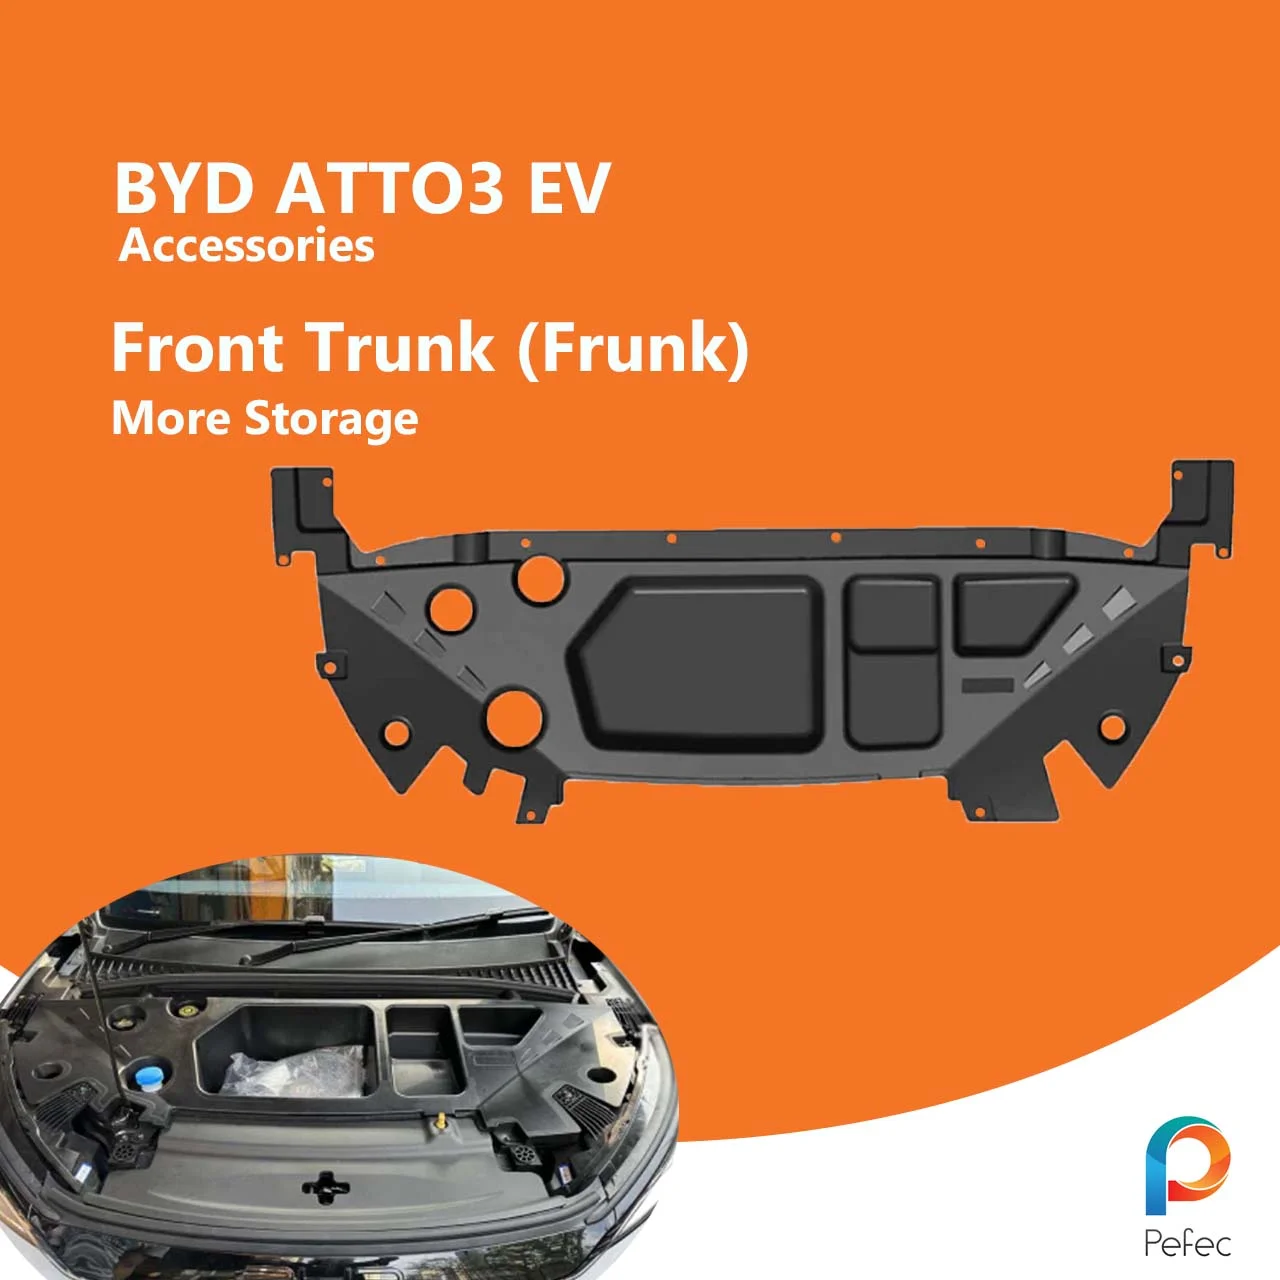 BYD Atto 3 Right Hand Drive Front Trunk Storage Box (Frunk)